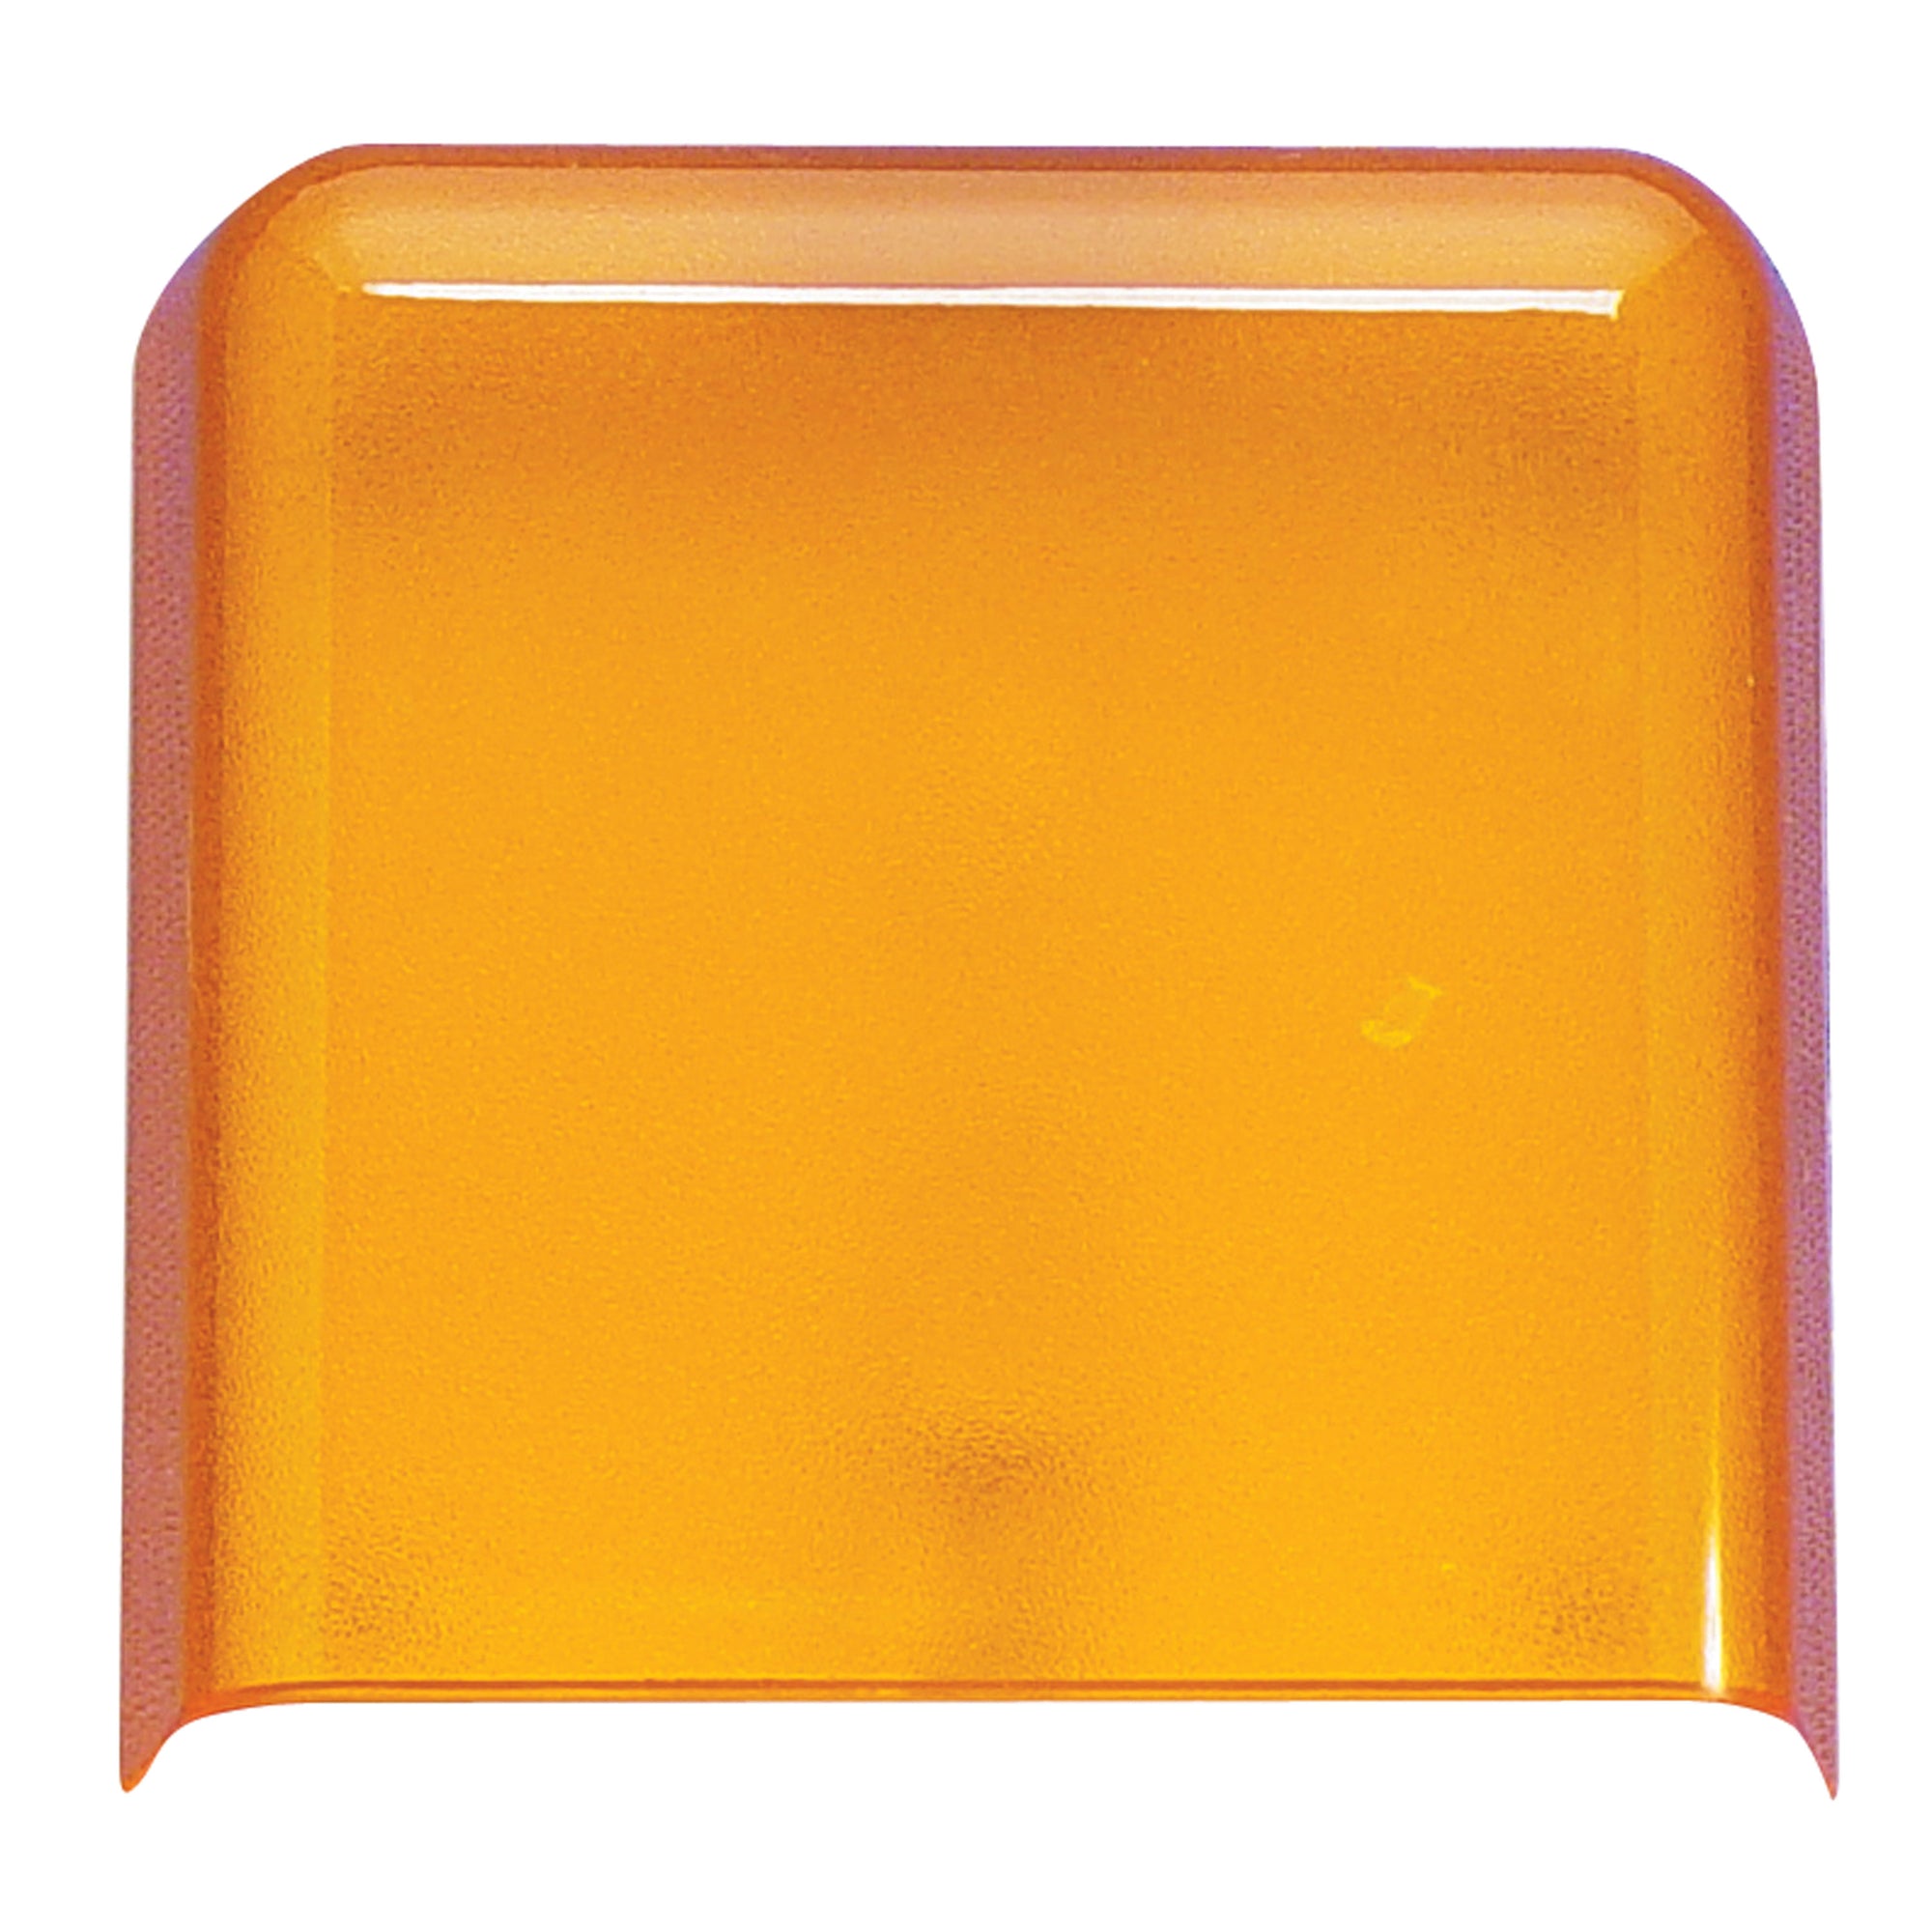 Fasteners Unlimited 89-207A Command Electronics Replacement Lens - Amber